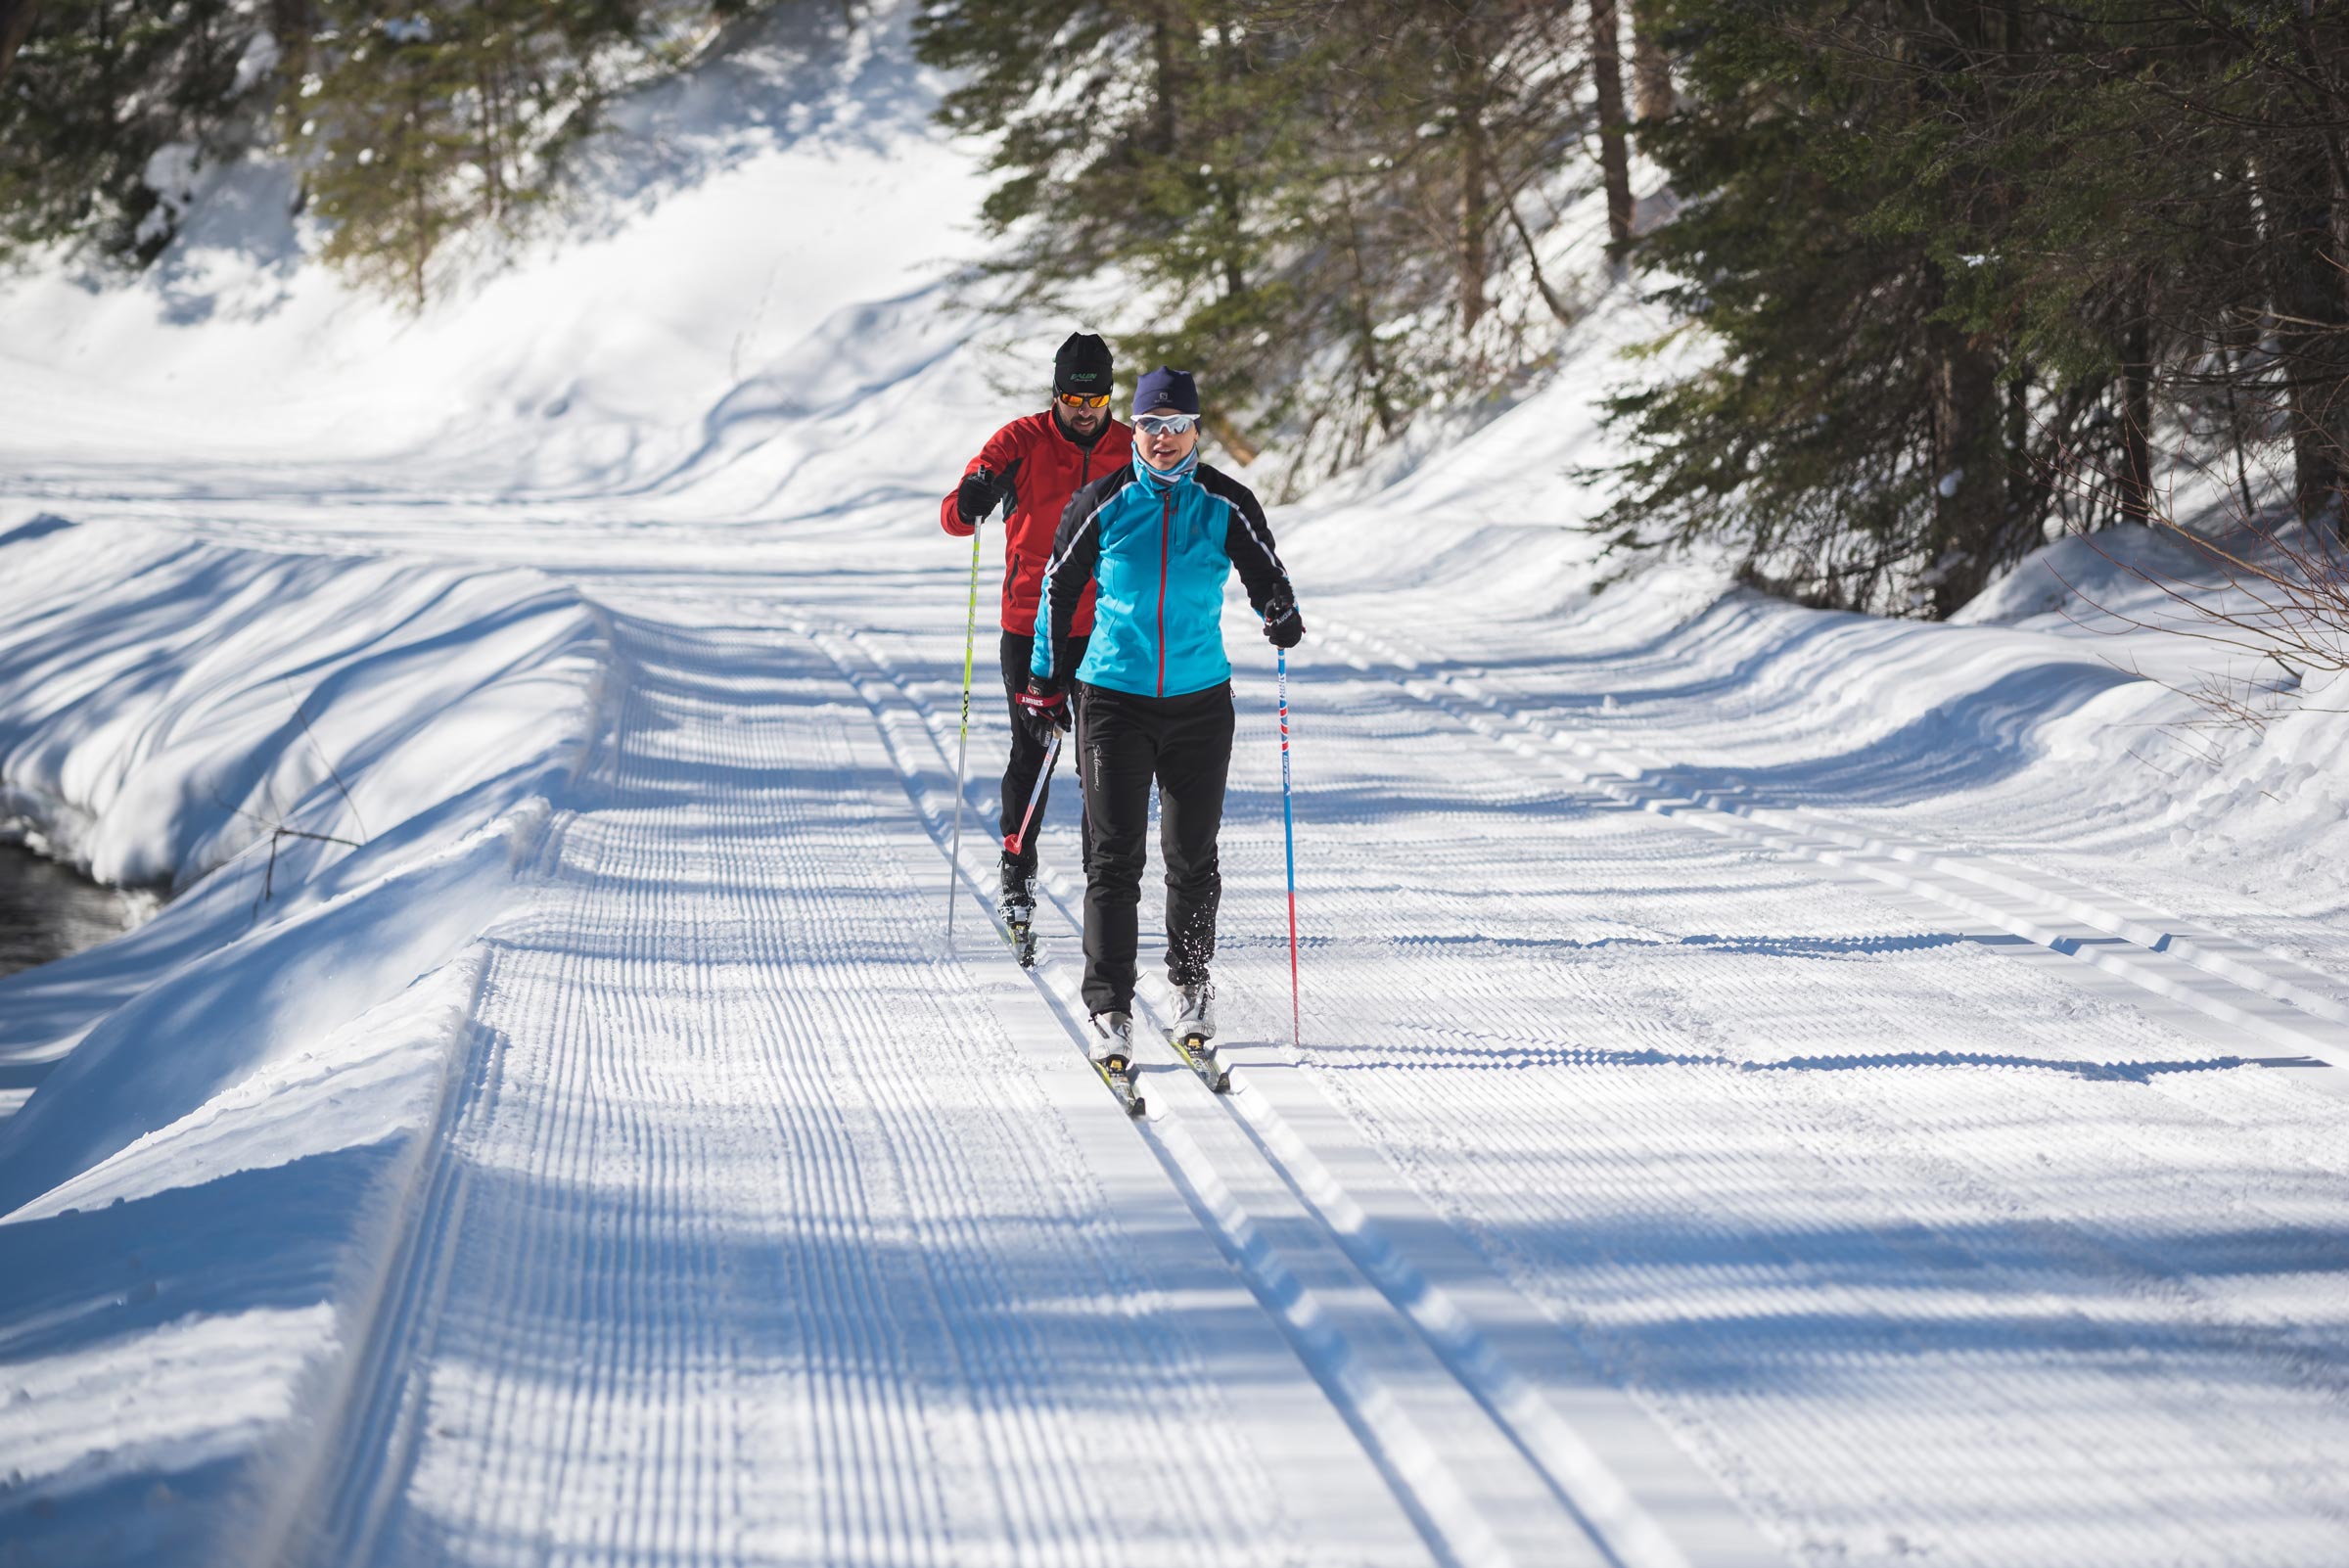 Couple cross-country skiing on a groomed trail at Mont-Sainte-Anne, Québec City area